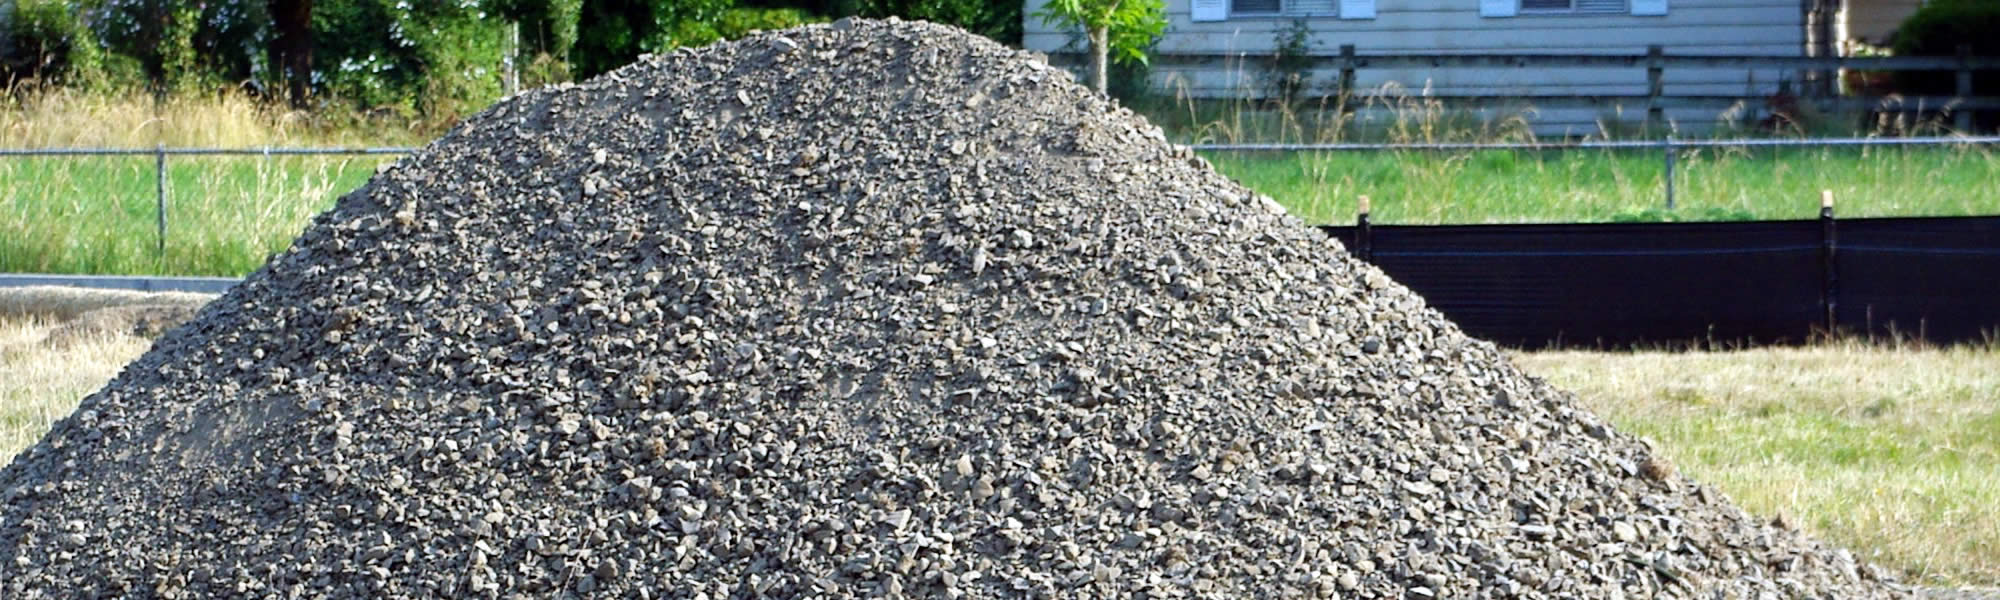 Green Bay Gravel and Dirt Delivery Services near me